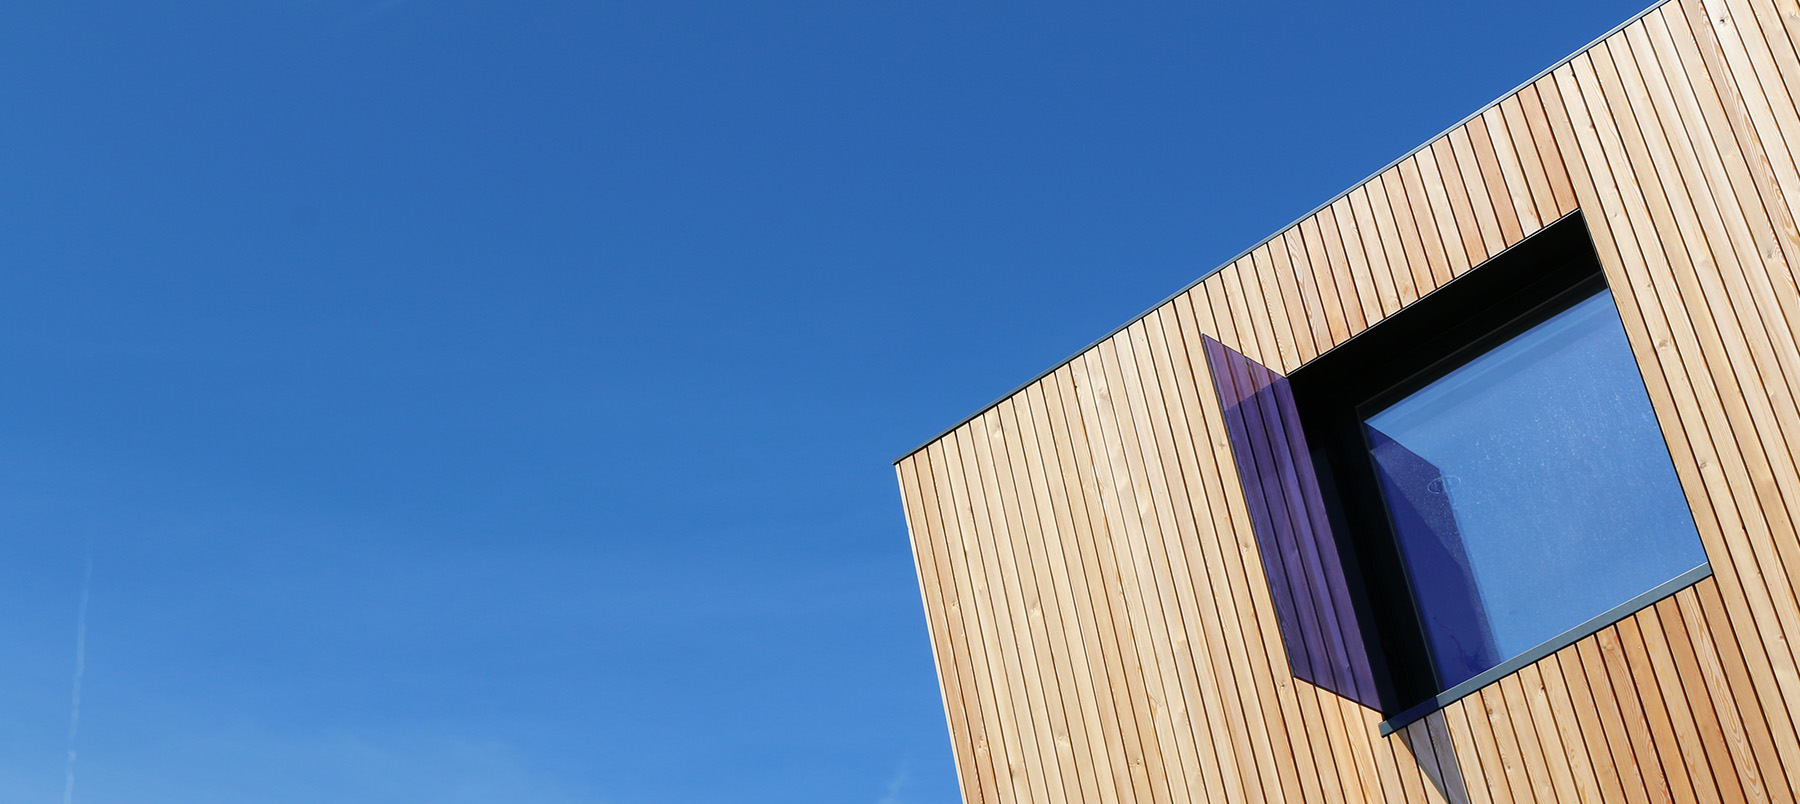 Top of timber clad contemporary building against a bright blue sky